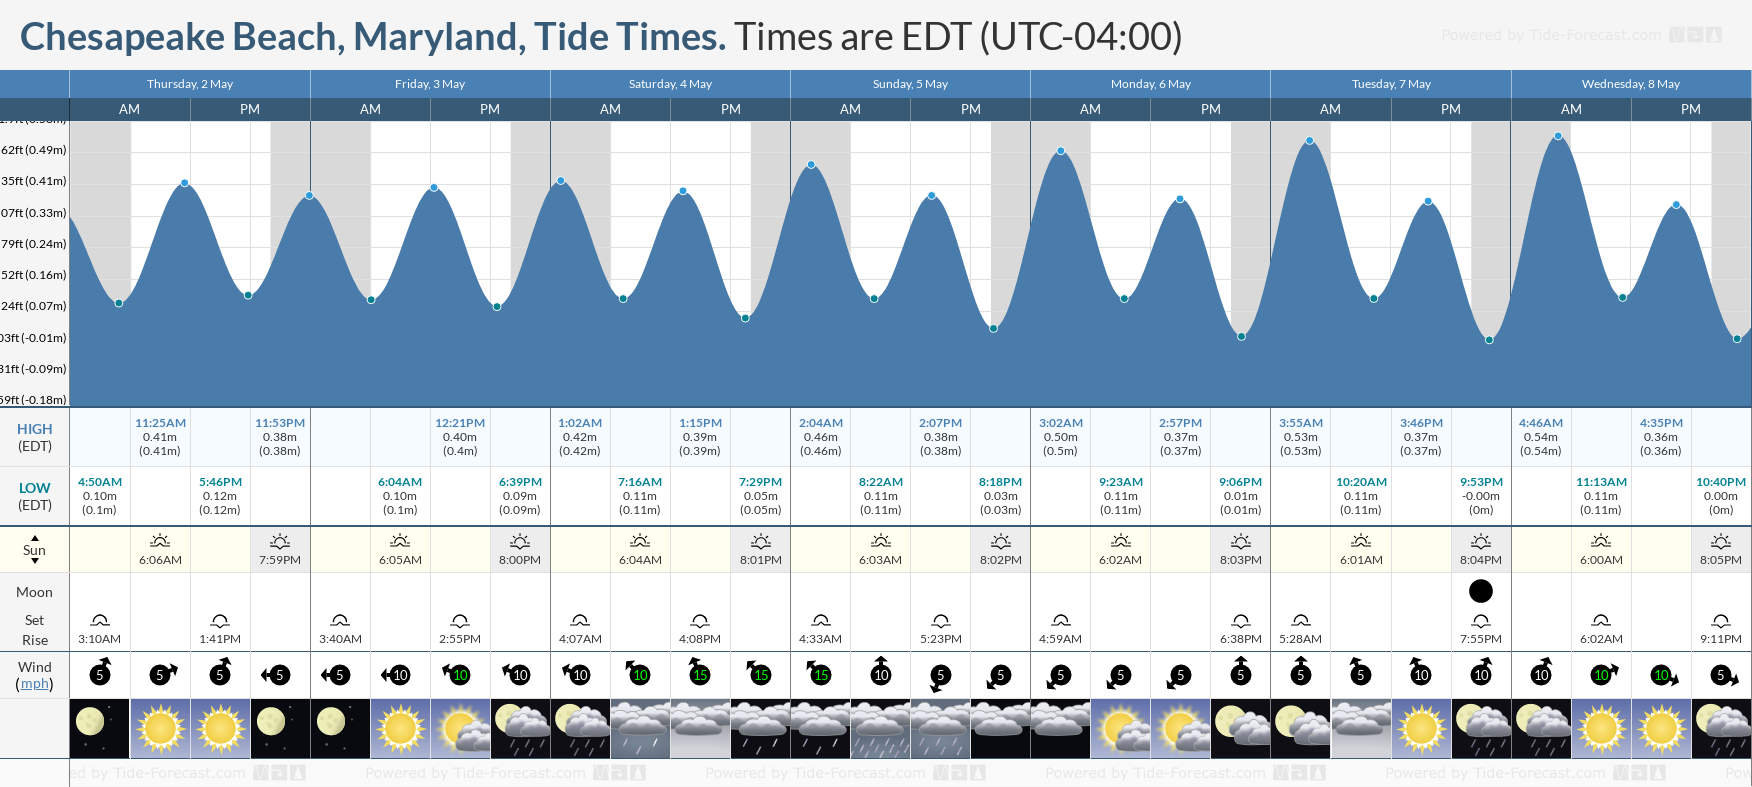 Chesapeake Beach, Maryland Tide Chart including high and low tide tide times for the next 7 days